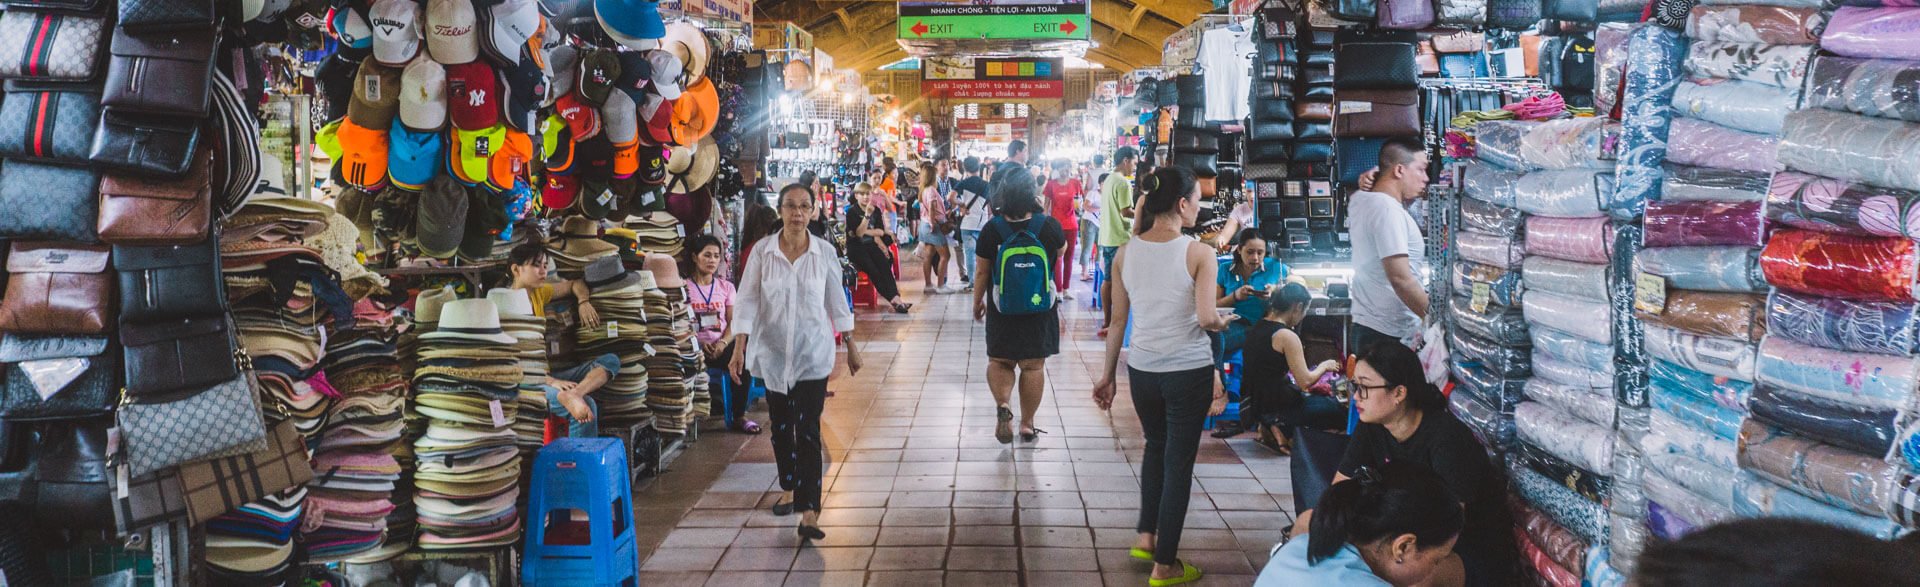 Ultimate Guide to Ben Thanh Market – What to Buy & How to Score the Best Deals